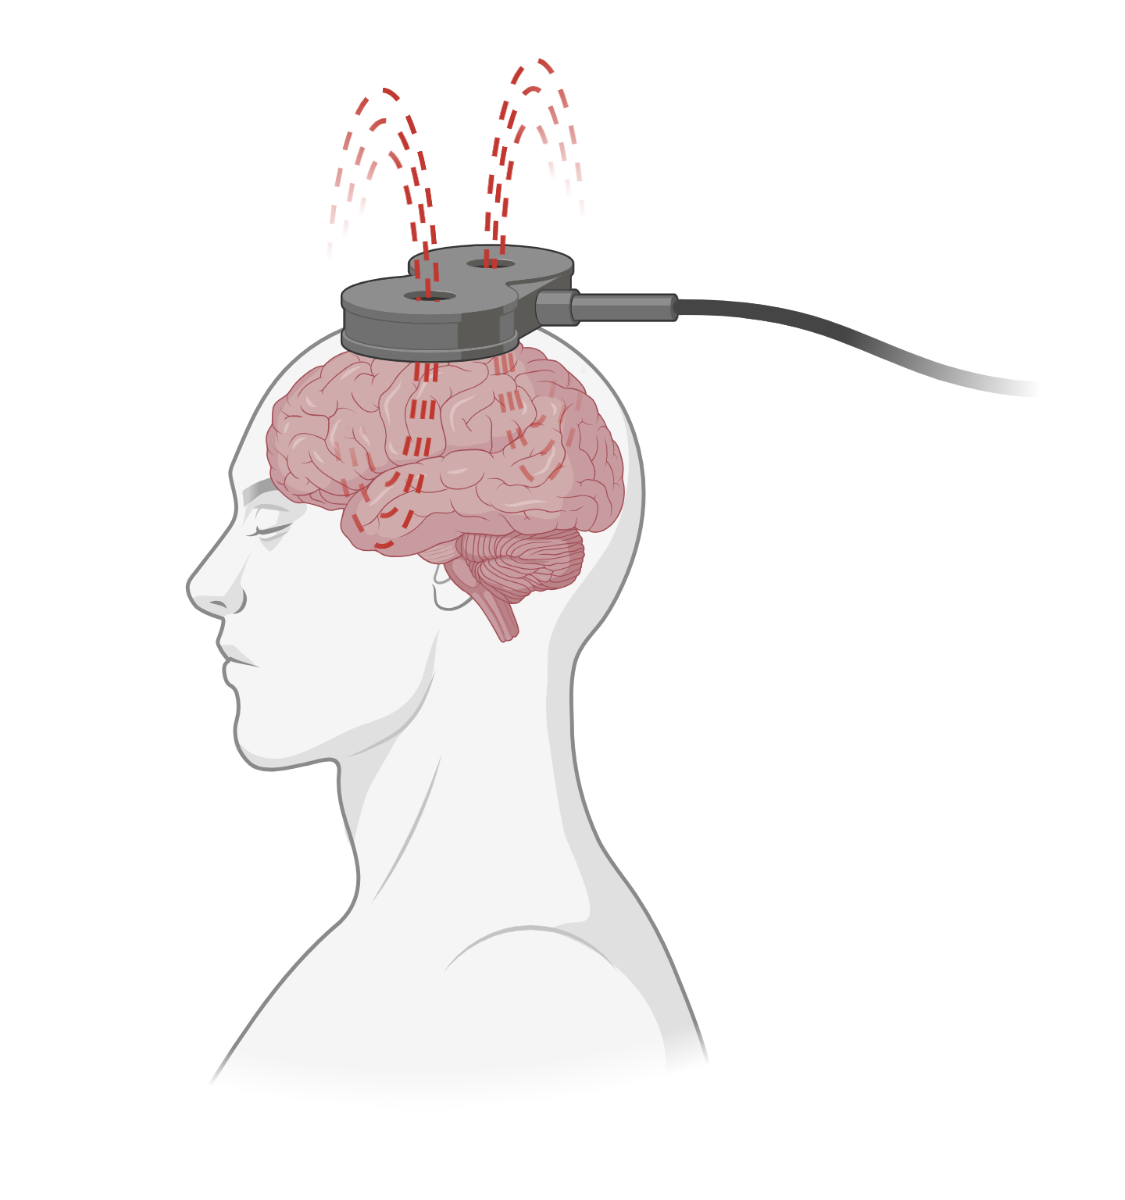 A TMS coil is shown with electrical current running through it, inducing a magnetic field in the brain region directly underneath it